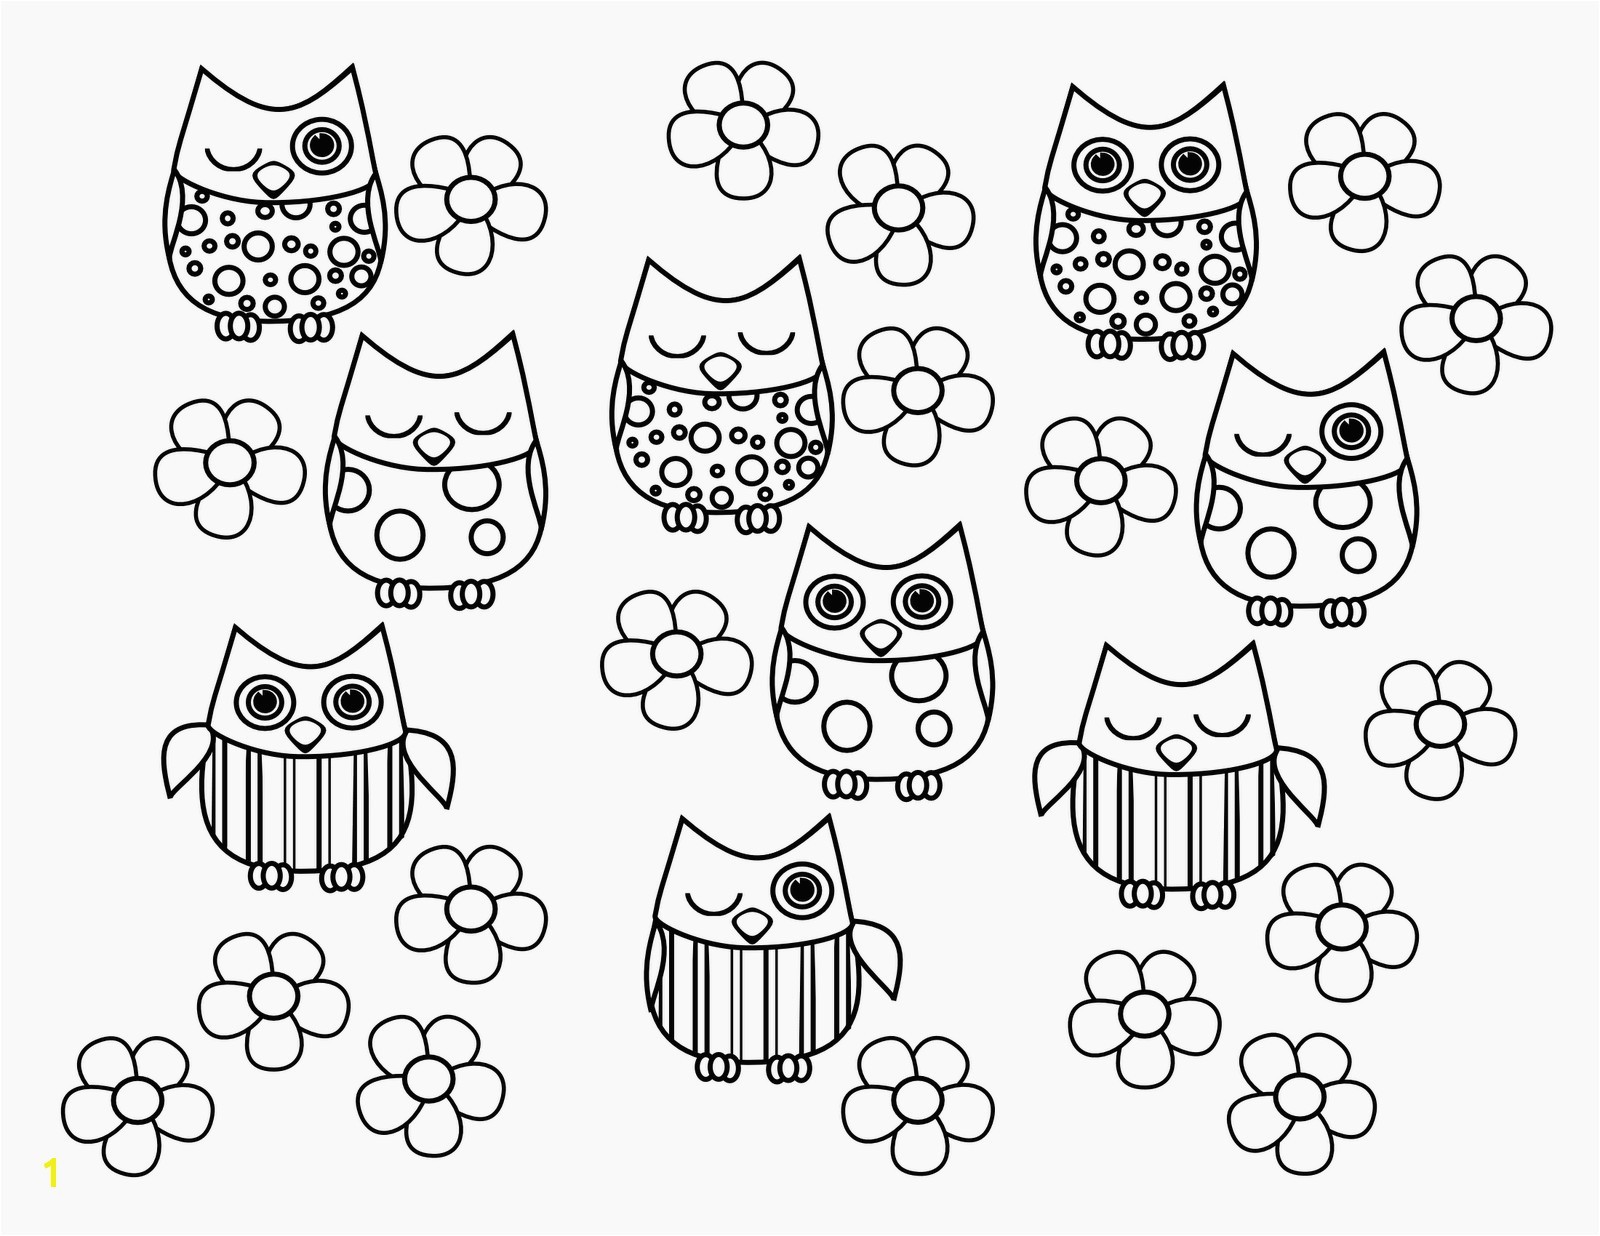 Cute Owl Coloring Pages 12 Elegant Cute Owl Coloring Pages